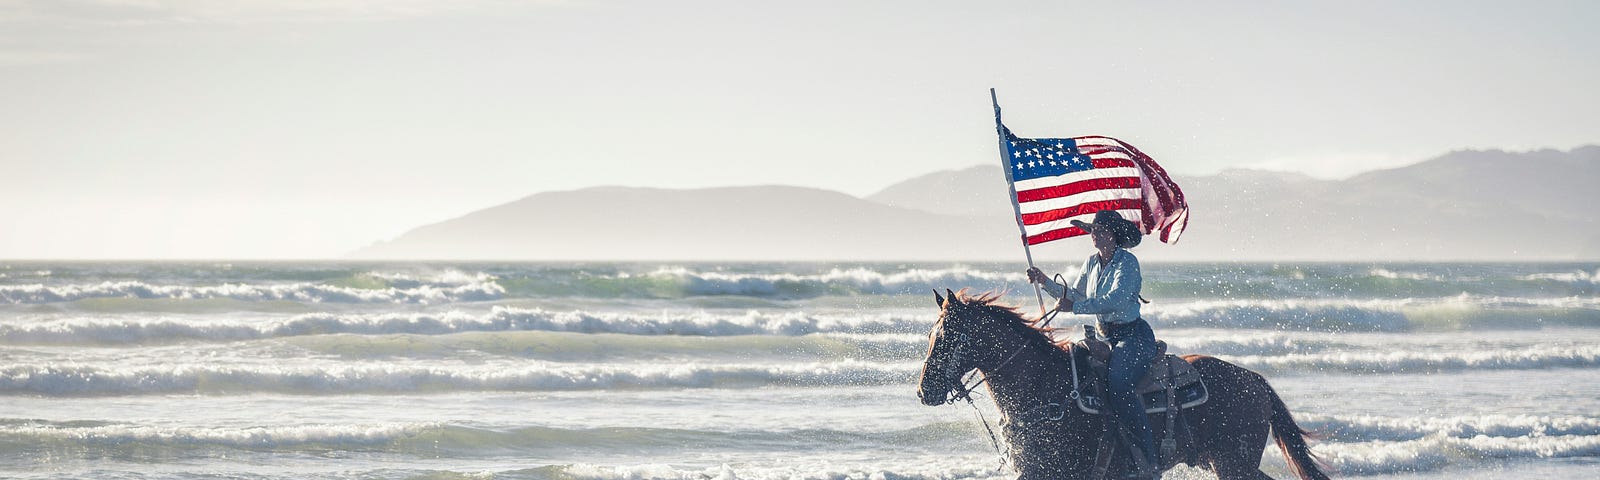 Man on horse galloping through waves while holding an American flag.